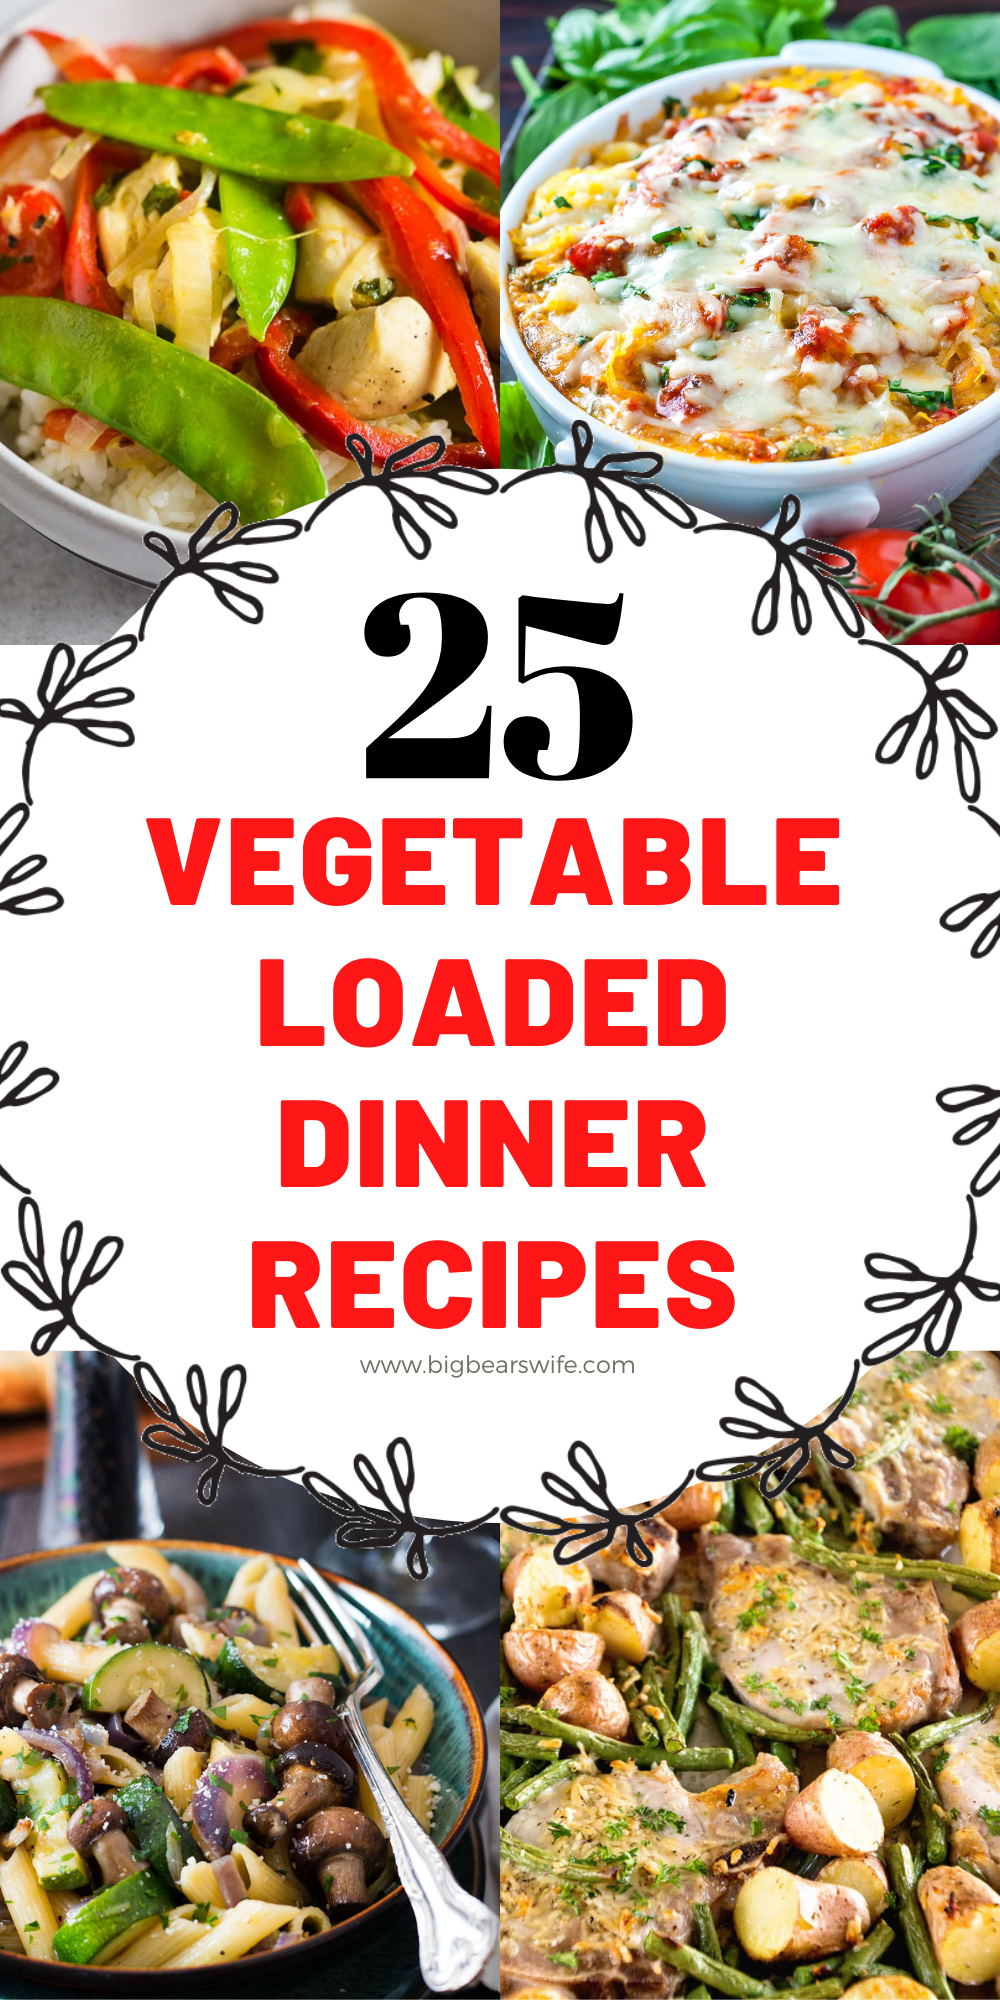 Trying to add more vegetables into your diet? Want your family to eat more vegetables without complaining? These 25 Vegetable Loaded Dinner Recipes will do the trick! via @bigbearswife